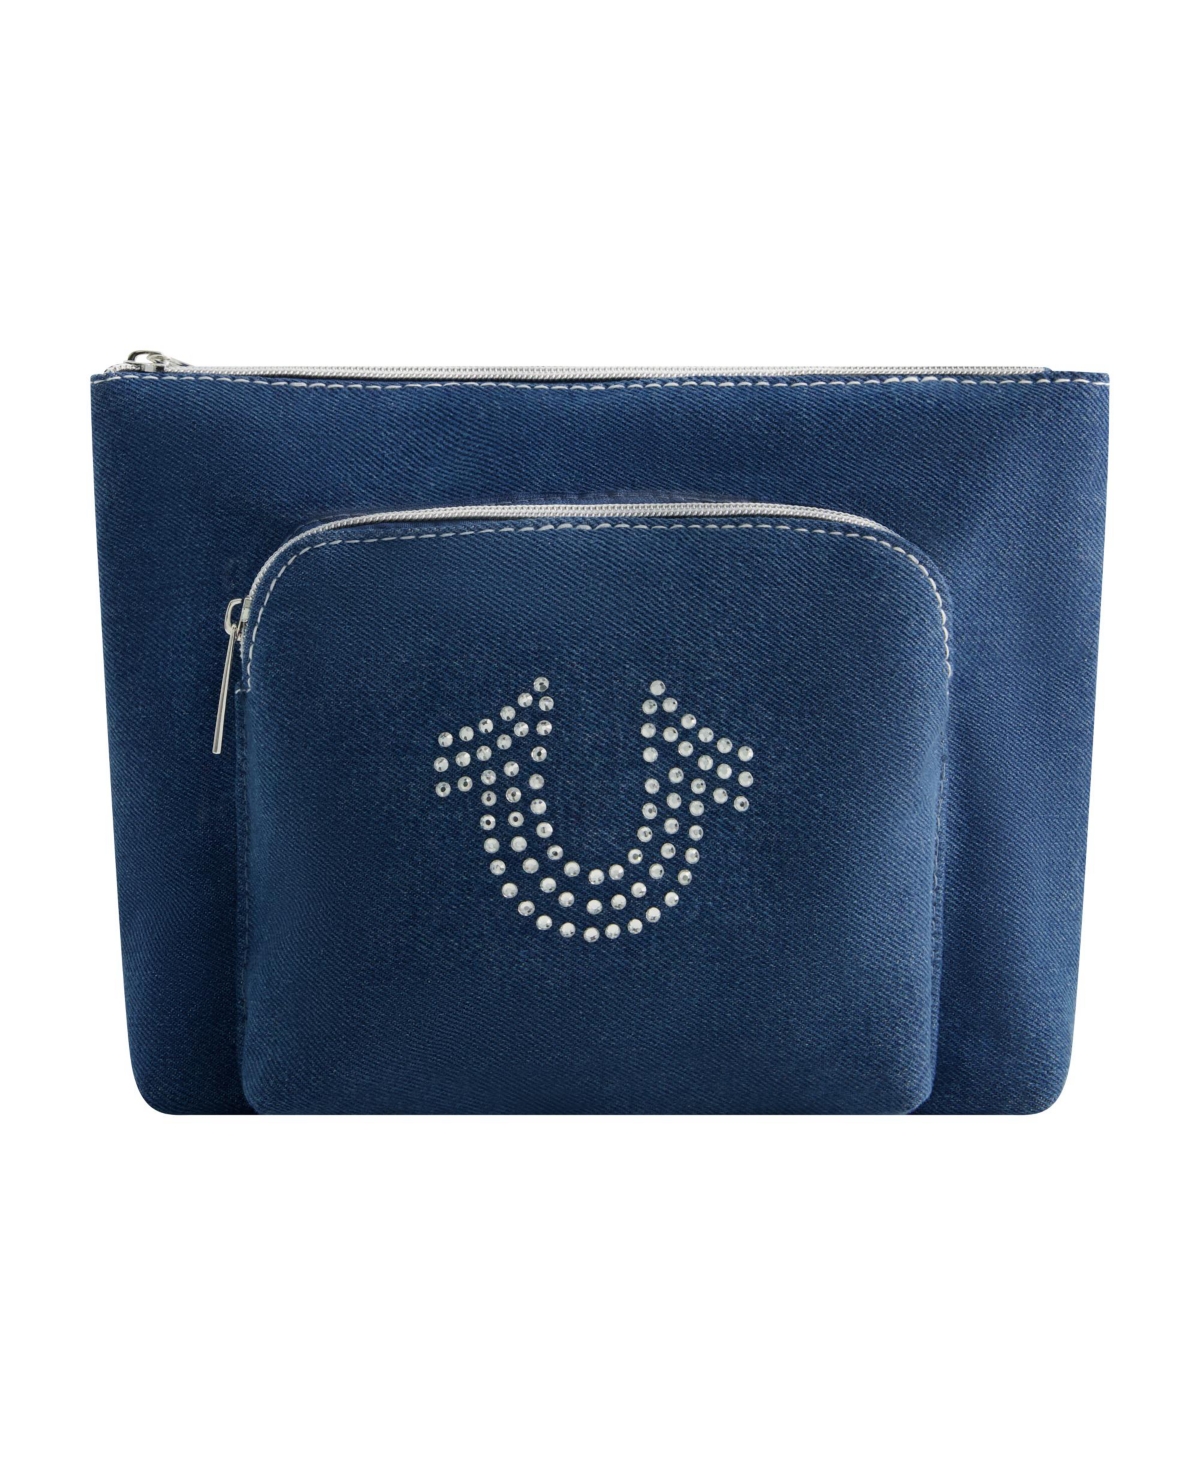 Trapazoid zip cosmetic bag with exterior zip pocket - Blue